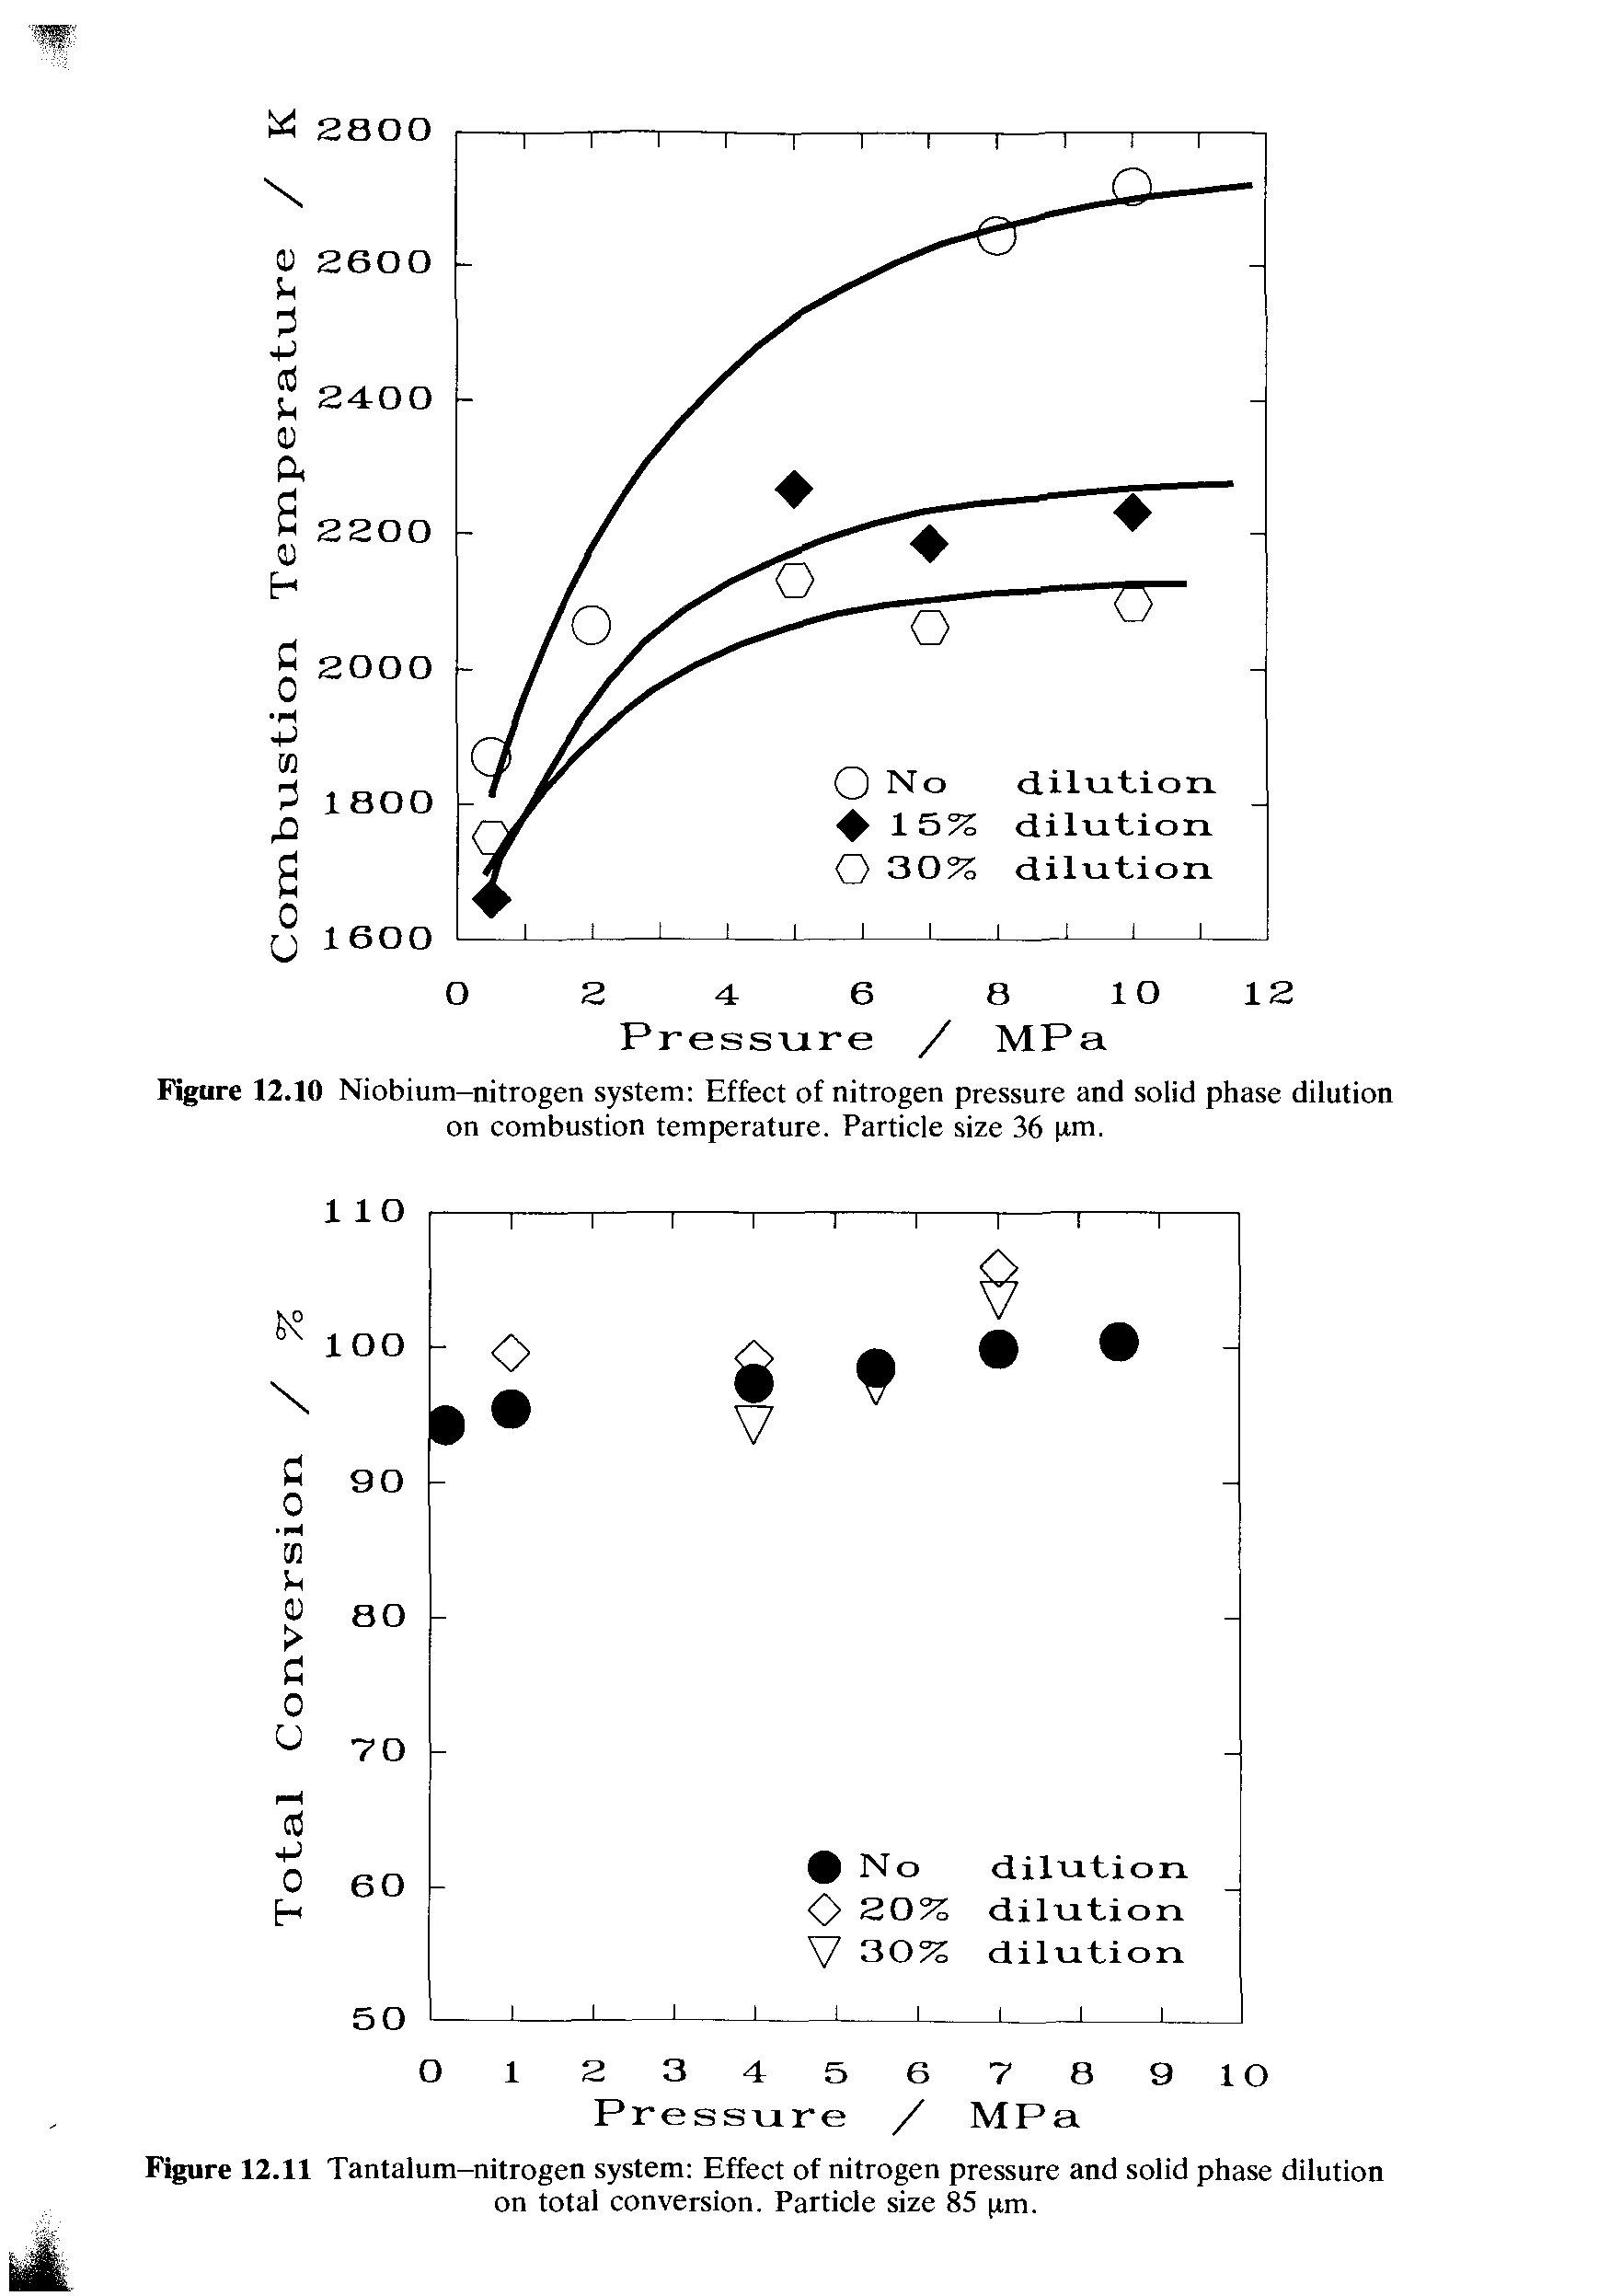 Figure 12.10 Niobium-nitrogen system Effect of nitrogen pressure and solid phase dilution on combustion temperature. Particle size 36 (rm.